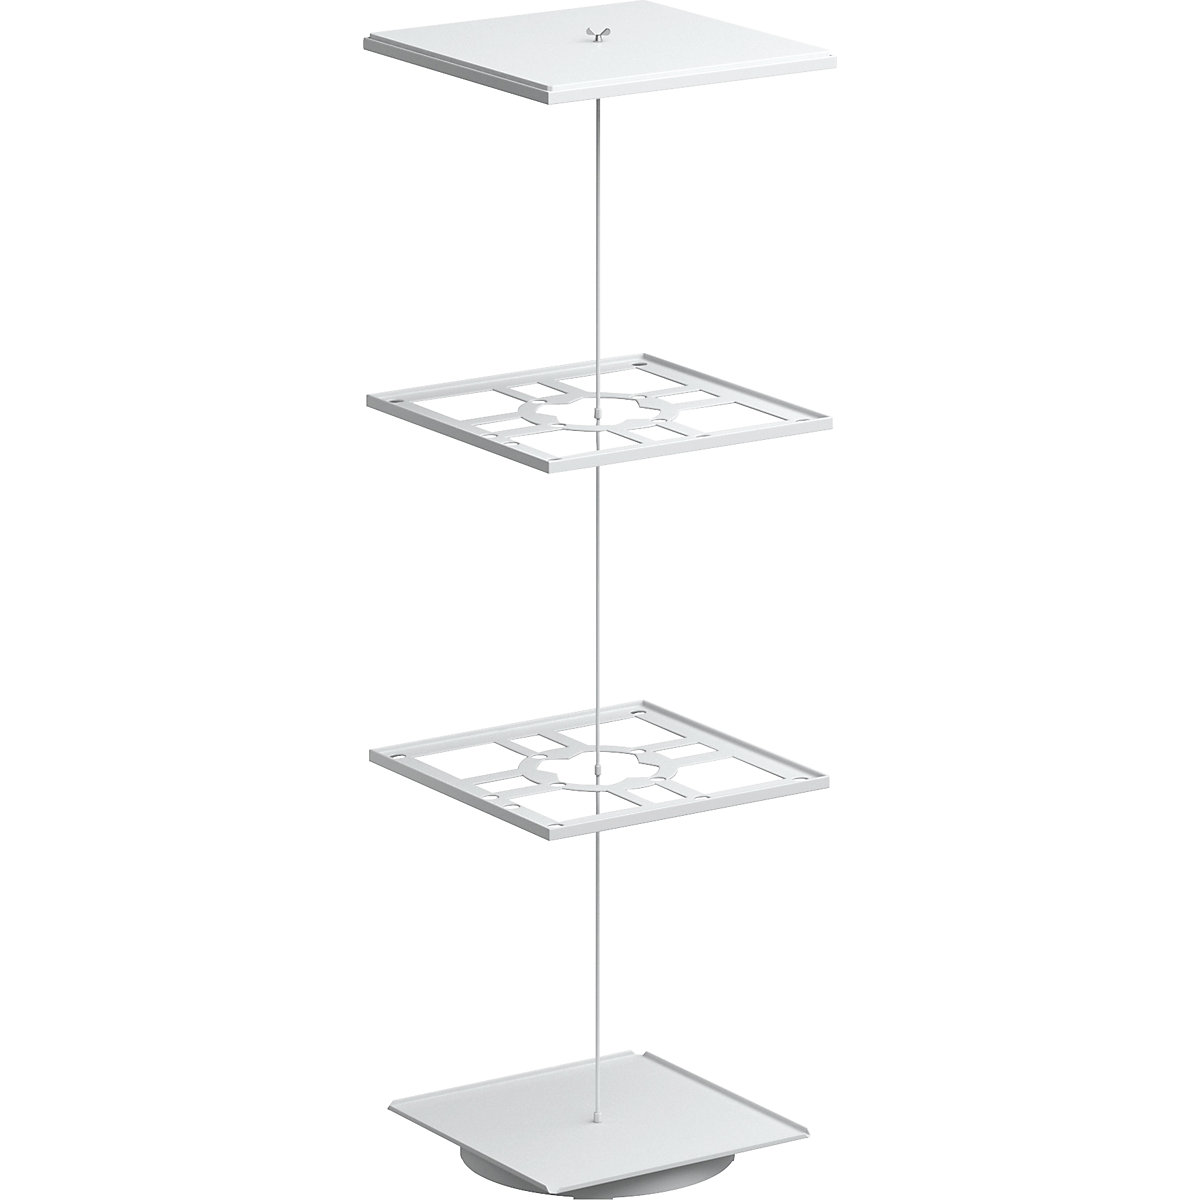 12-550 ESD revolving stand